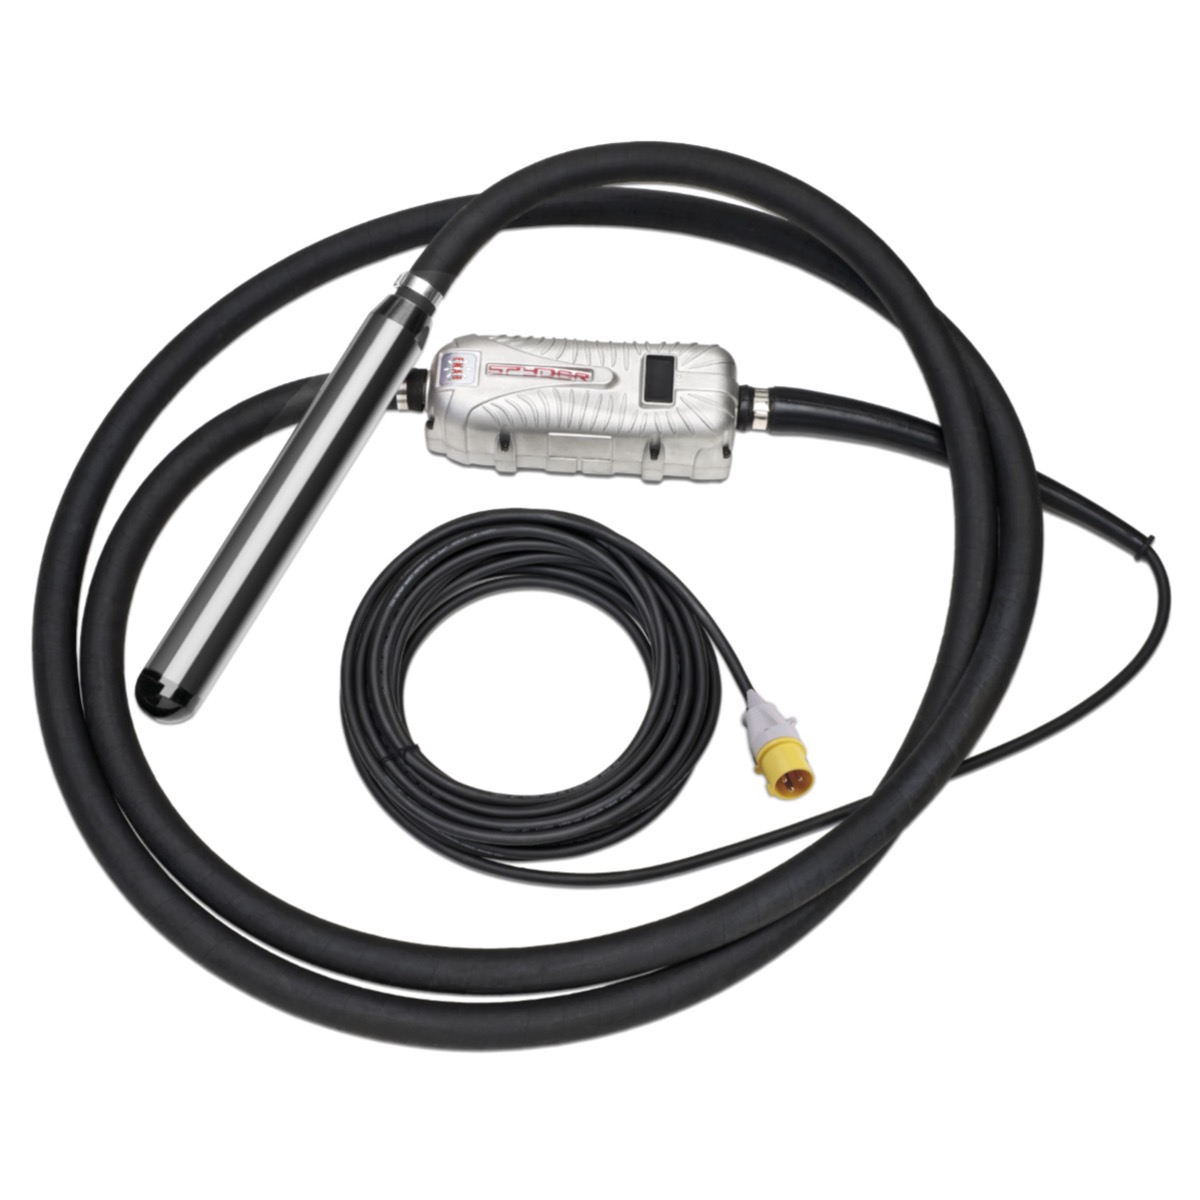 Spyder Pro Excel 50mm Head, 7m flex, 15m cable. The high frequency Spyder Pro is a compact and cost efficient concrete vibrator. Due to the converter and vibrator being an all in one package you don't need to purchase the equipment in 2 separate parts. Av